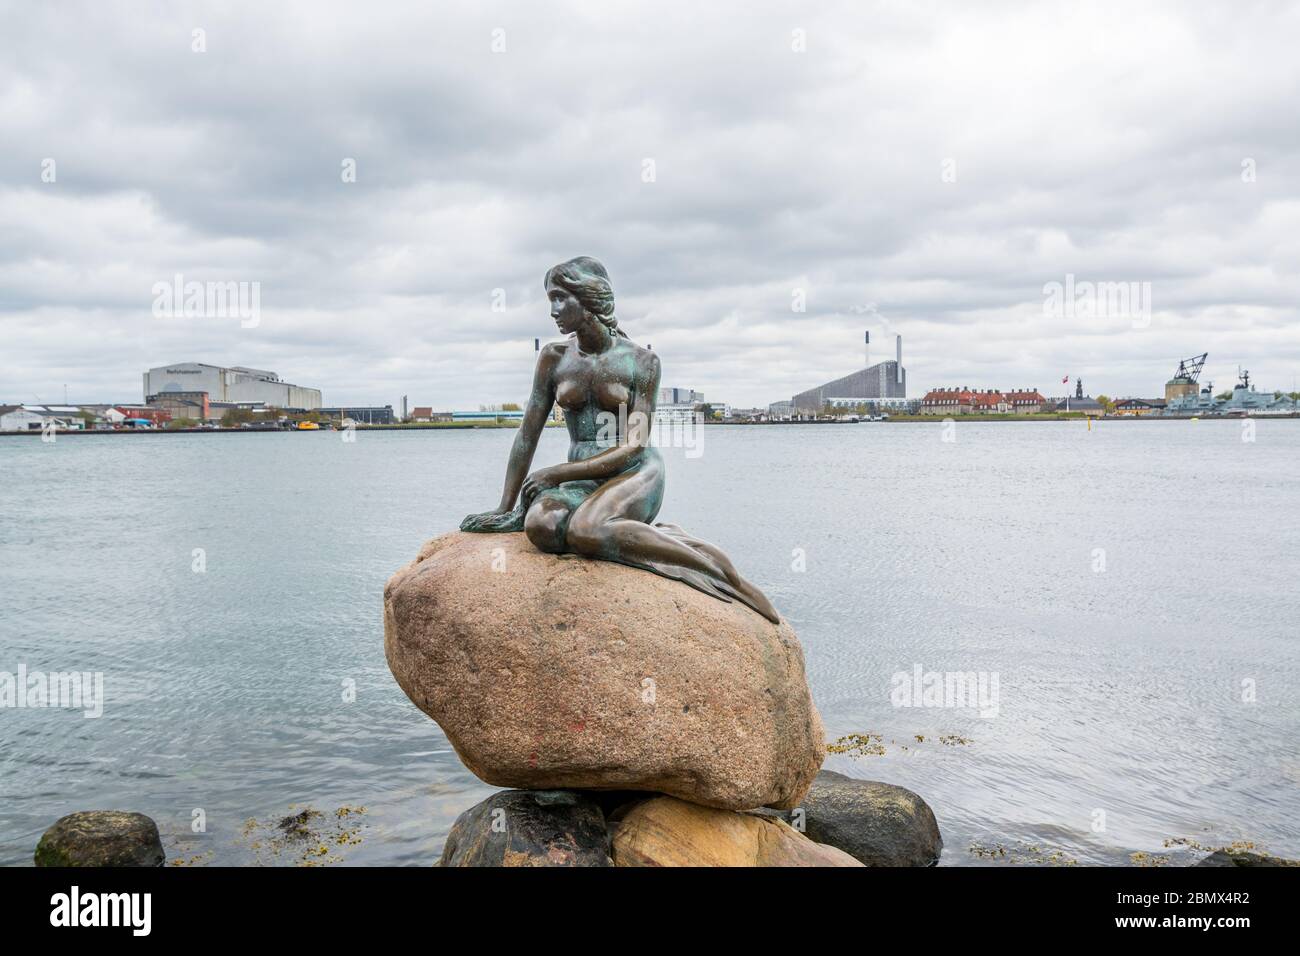 The Little Mermaid statue by Edvard Eriksen, displayed on a rock by the ...